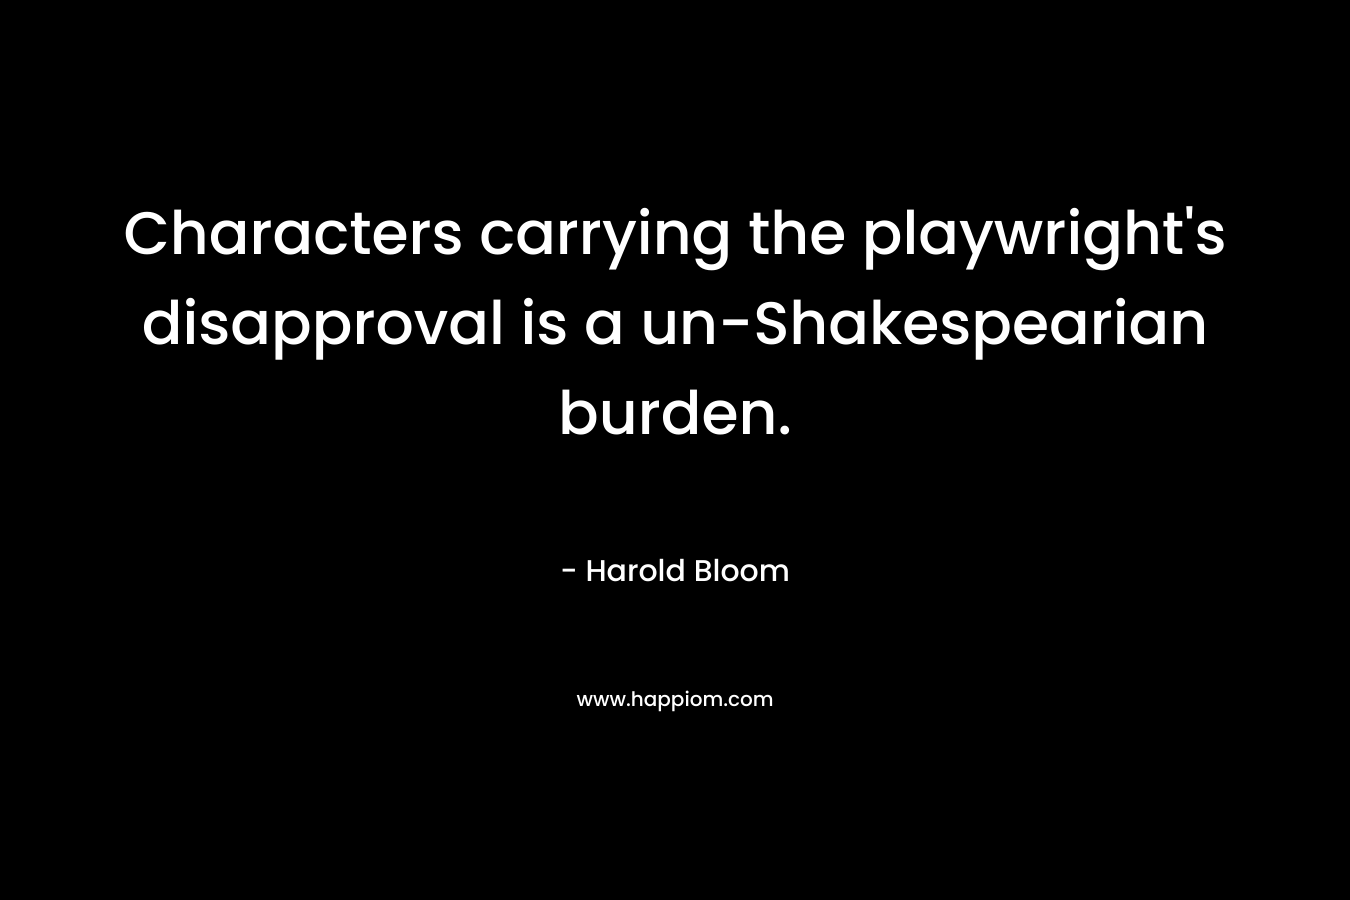 Characters carrying the playwright’s disapproval is a un-Shakespearian burden. – Harold Bloom